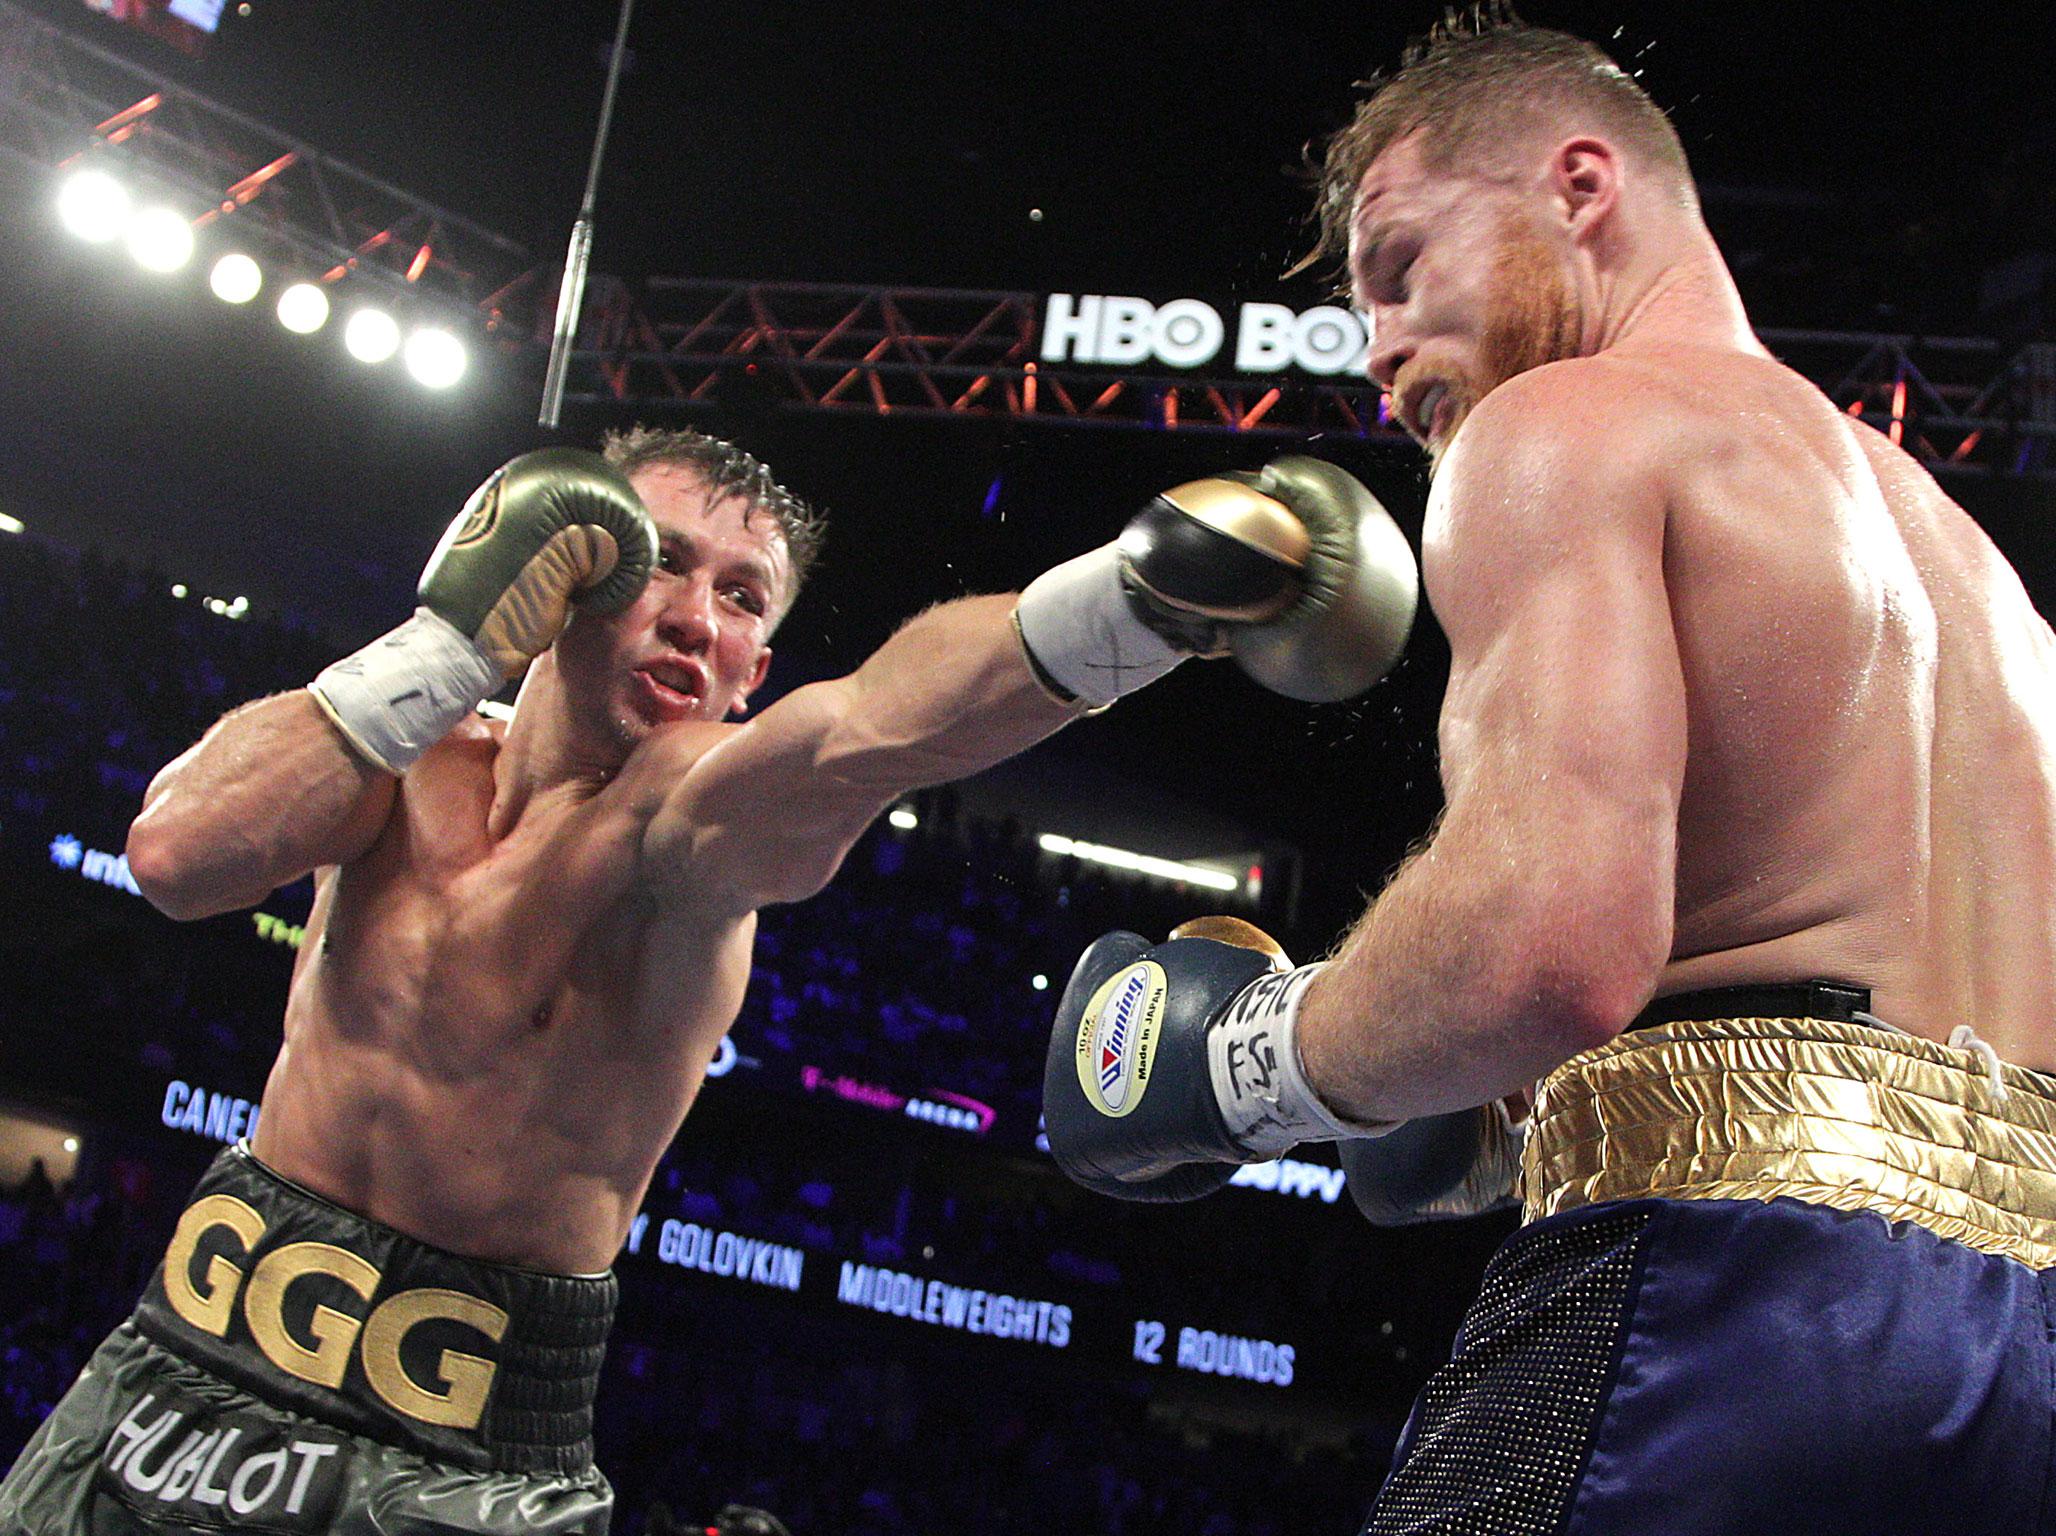 Golovkin had the better of the middle rounds after Alvarez had started the better